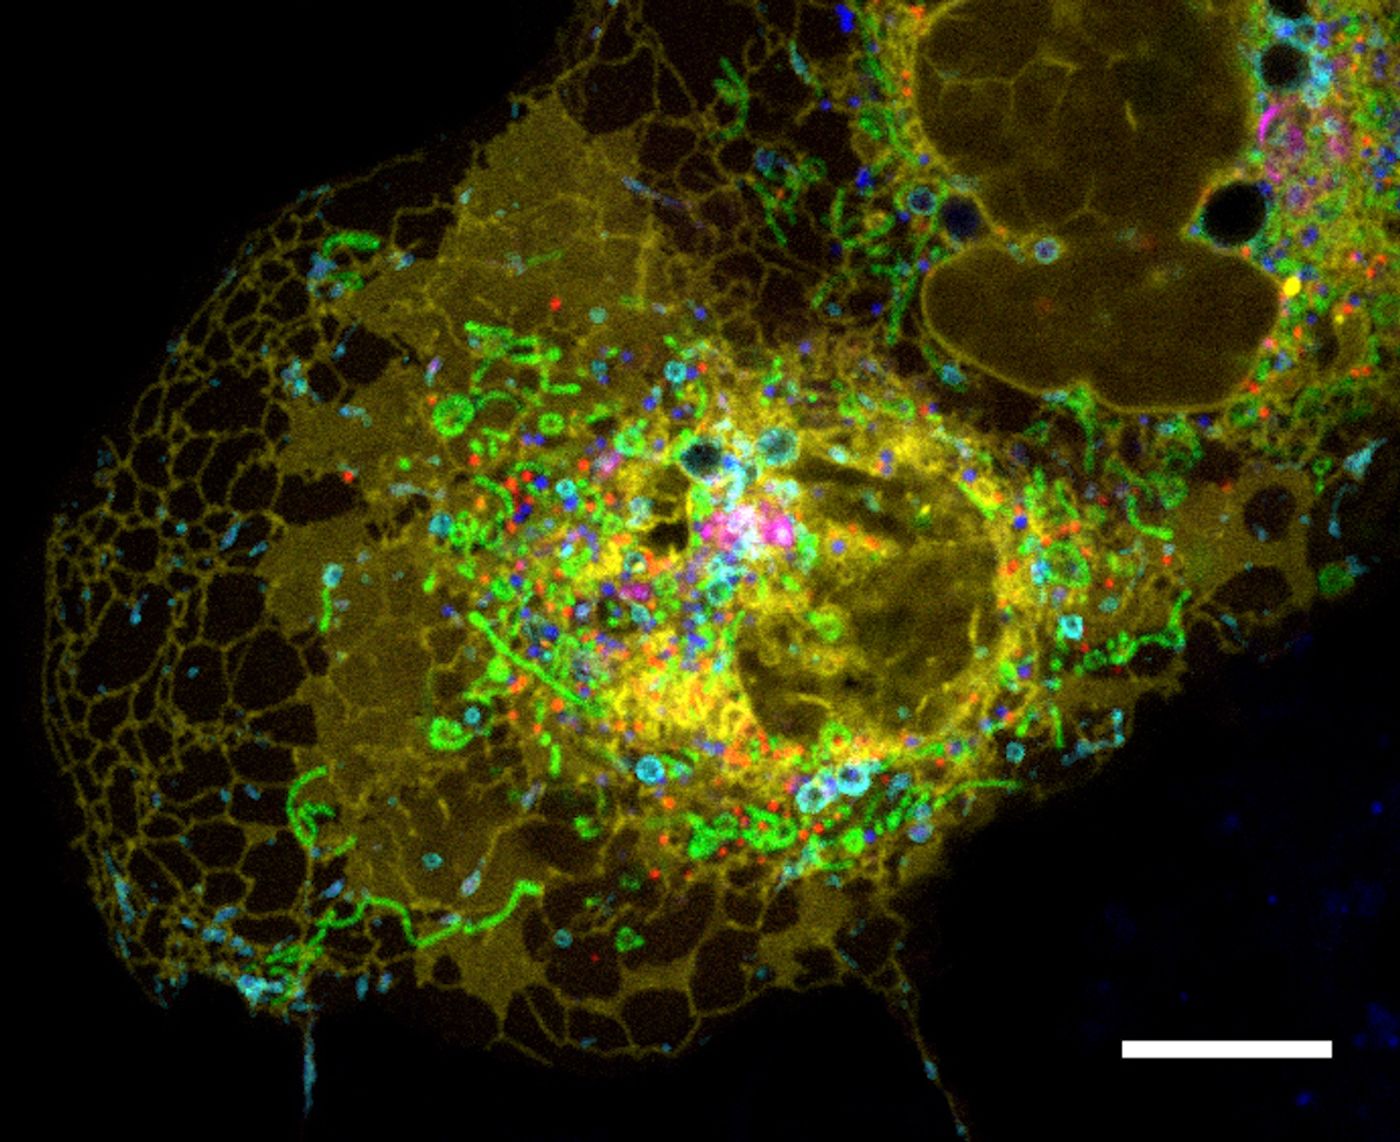 Multispectral confocal microscopy of a fibroblast cell expressing fluorescent proteins targeted to organelles: lysosomes, mitochondria, endoplastmic reticulum, peroxisomes, Golgi, and lipid droplets. Scale bar, 10 µm. / Credit: CC2.0 / NIH